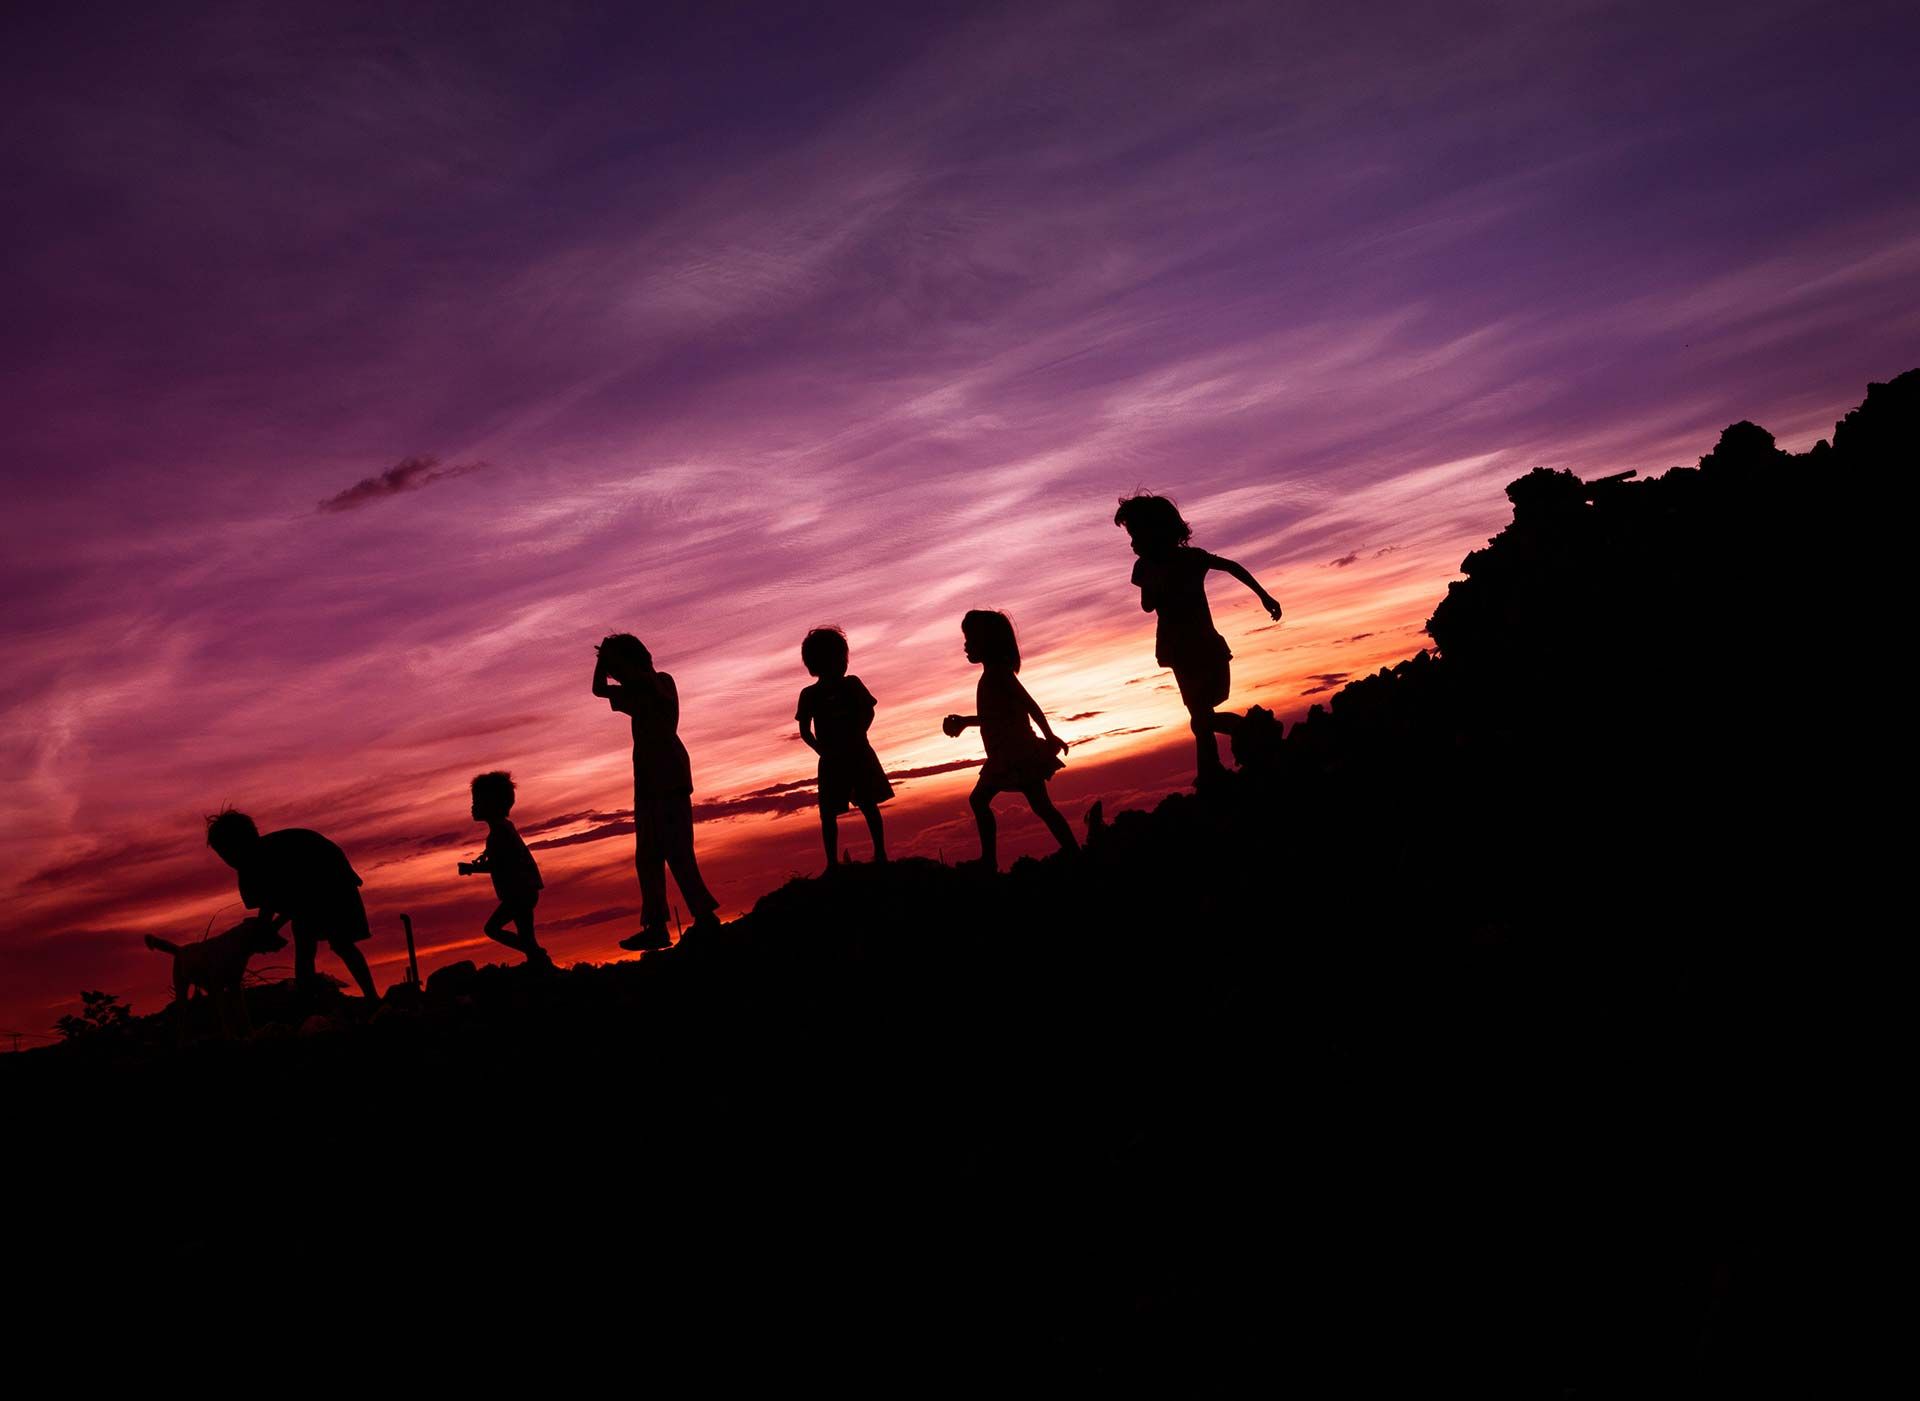 Sunset image of a group of children on a slope in silhouette